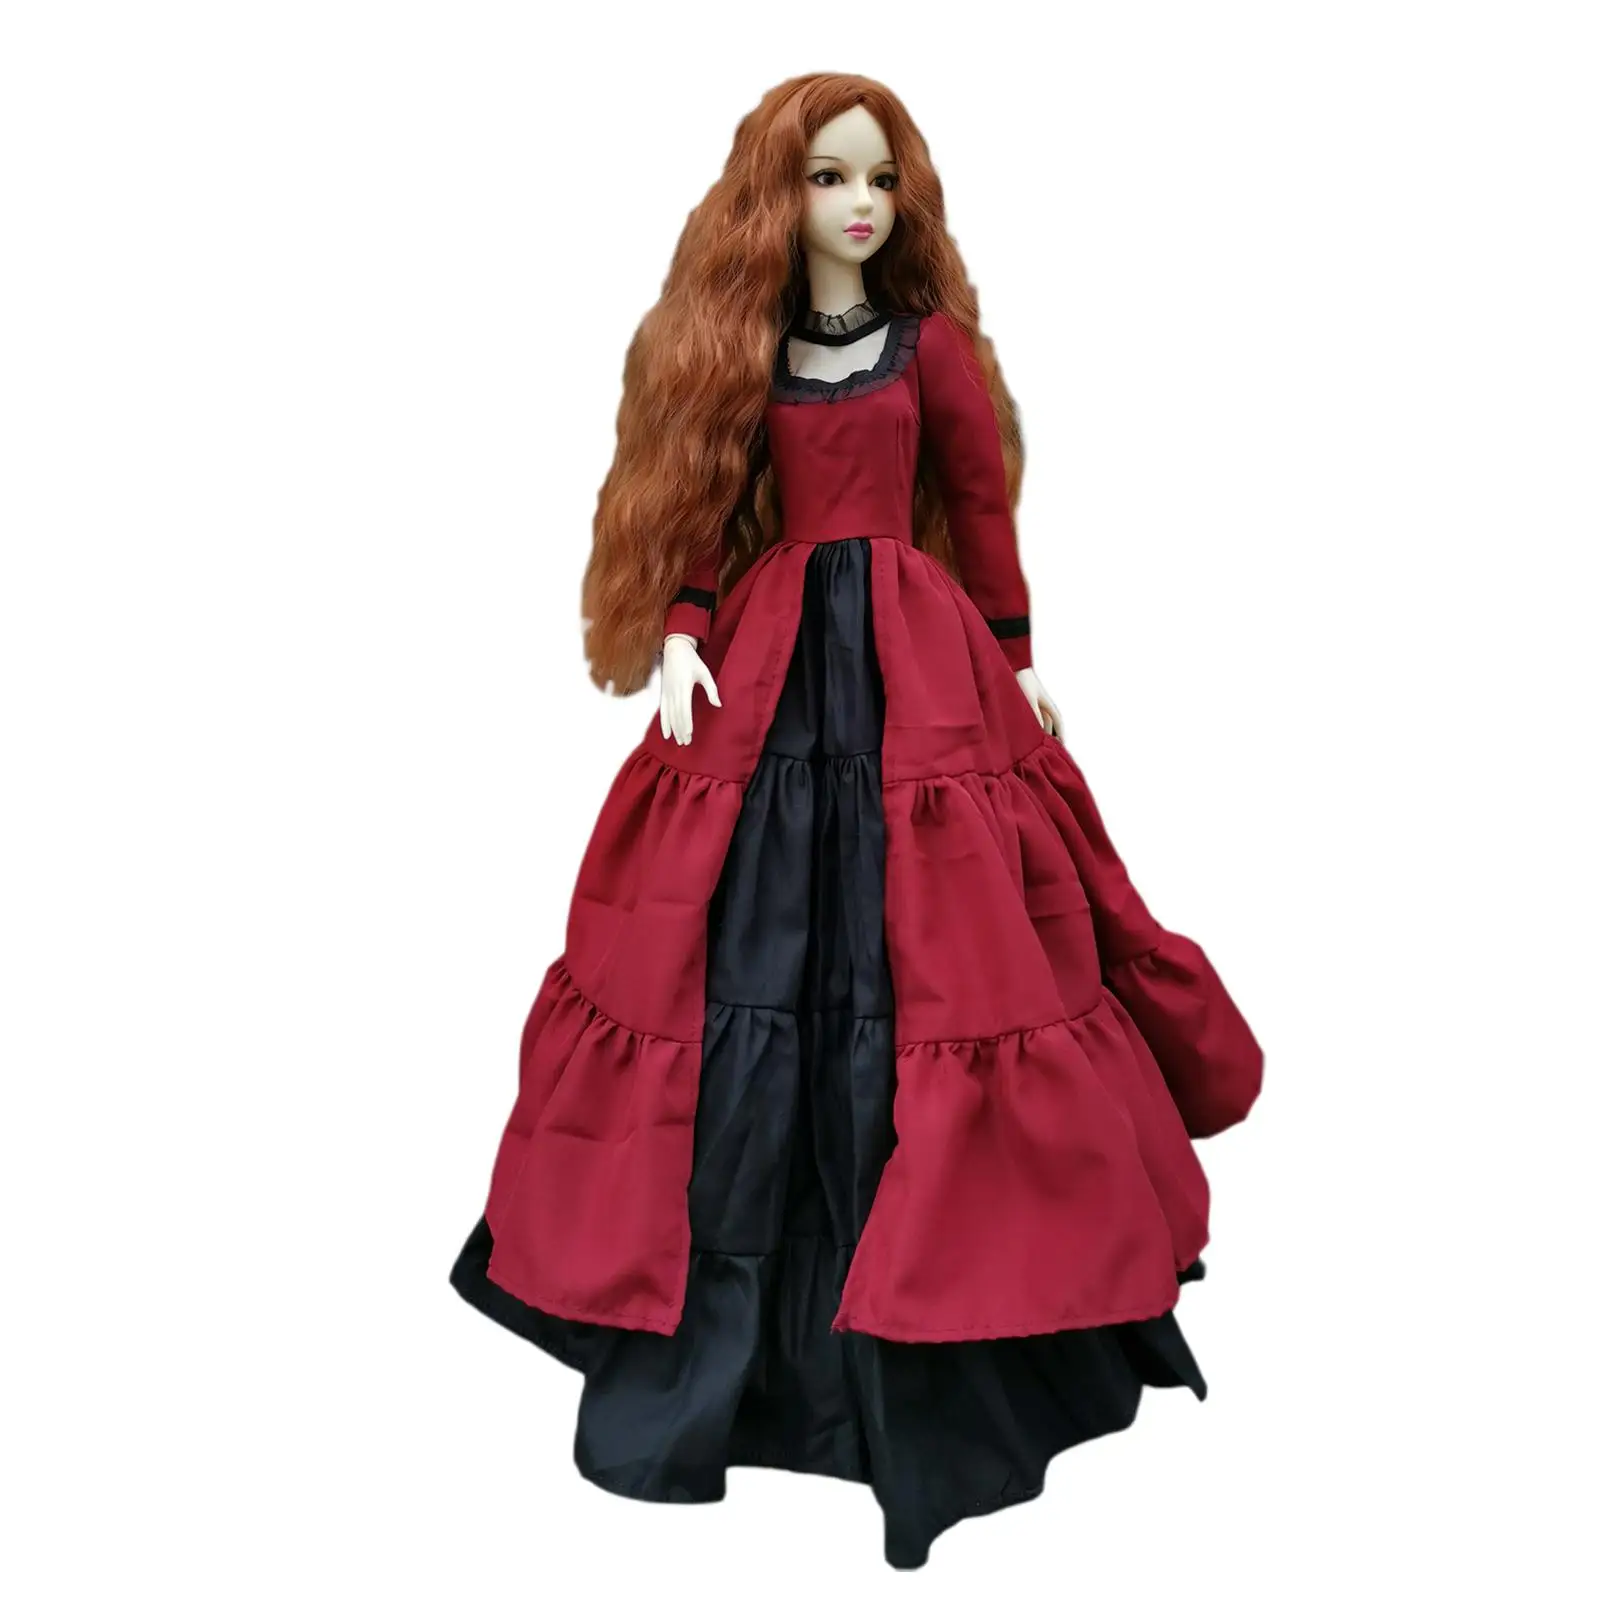 Ball Jointed Doll 1/3 Dolls with Beautiful Doll Clothes , Action Figures for Gifts